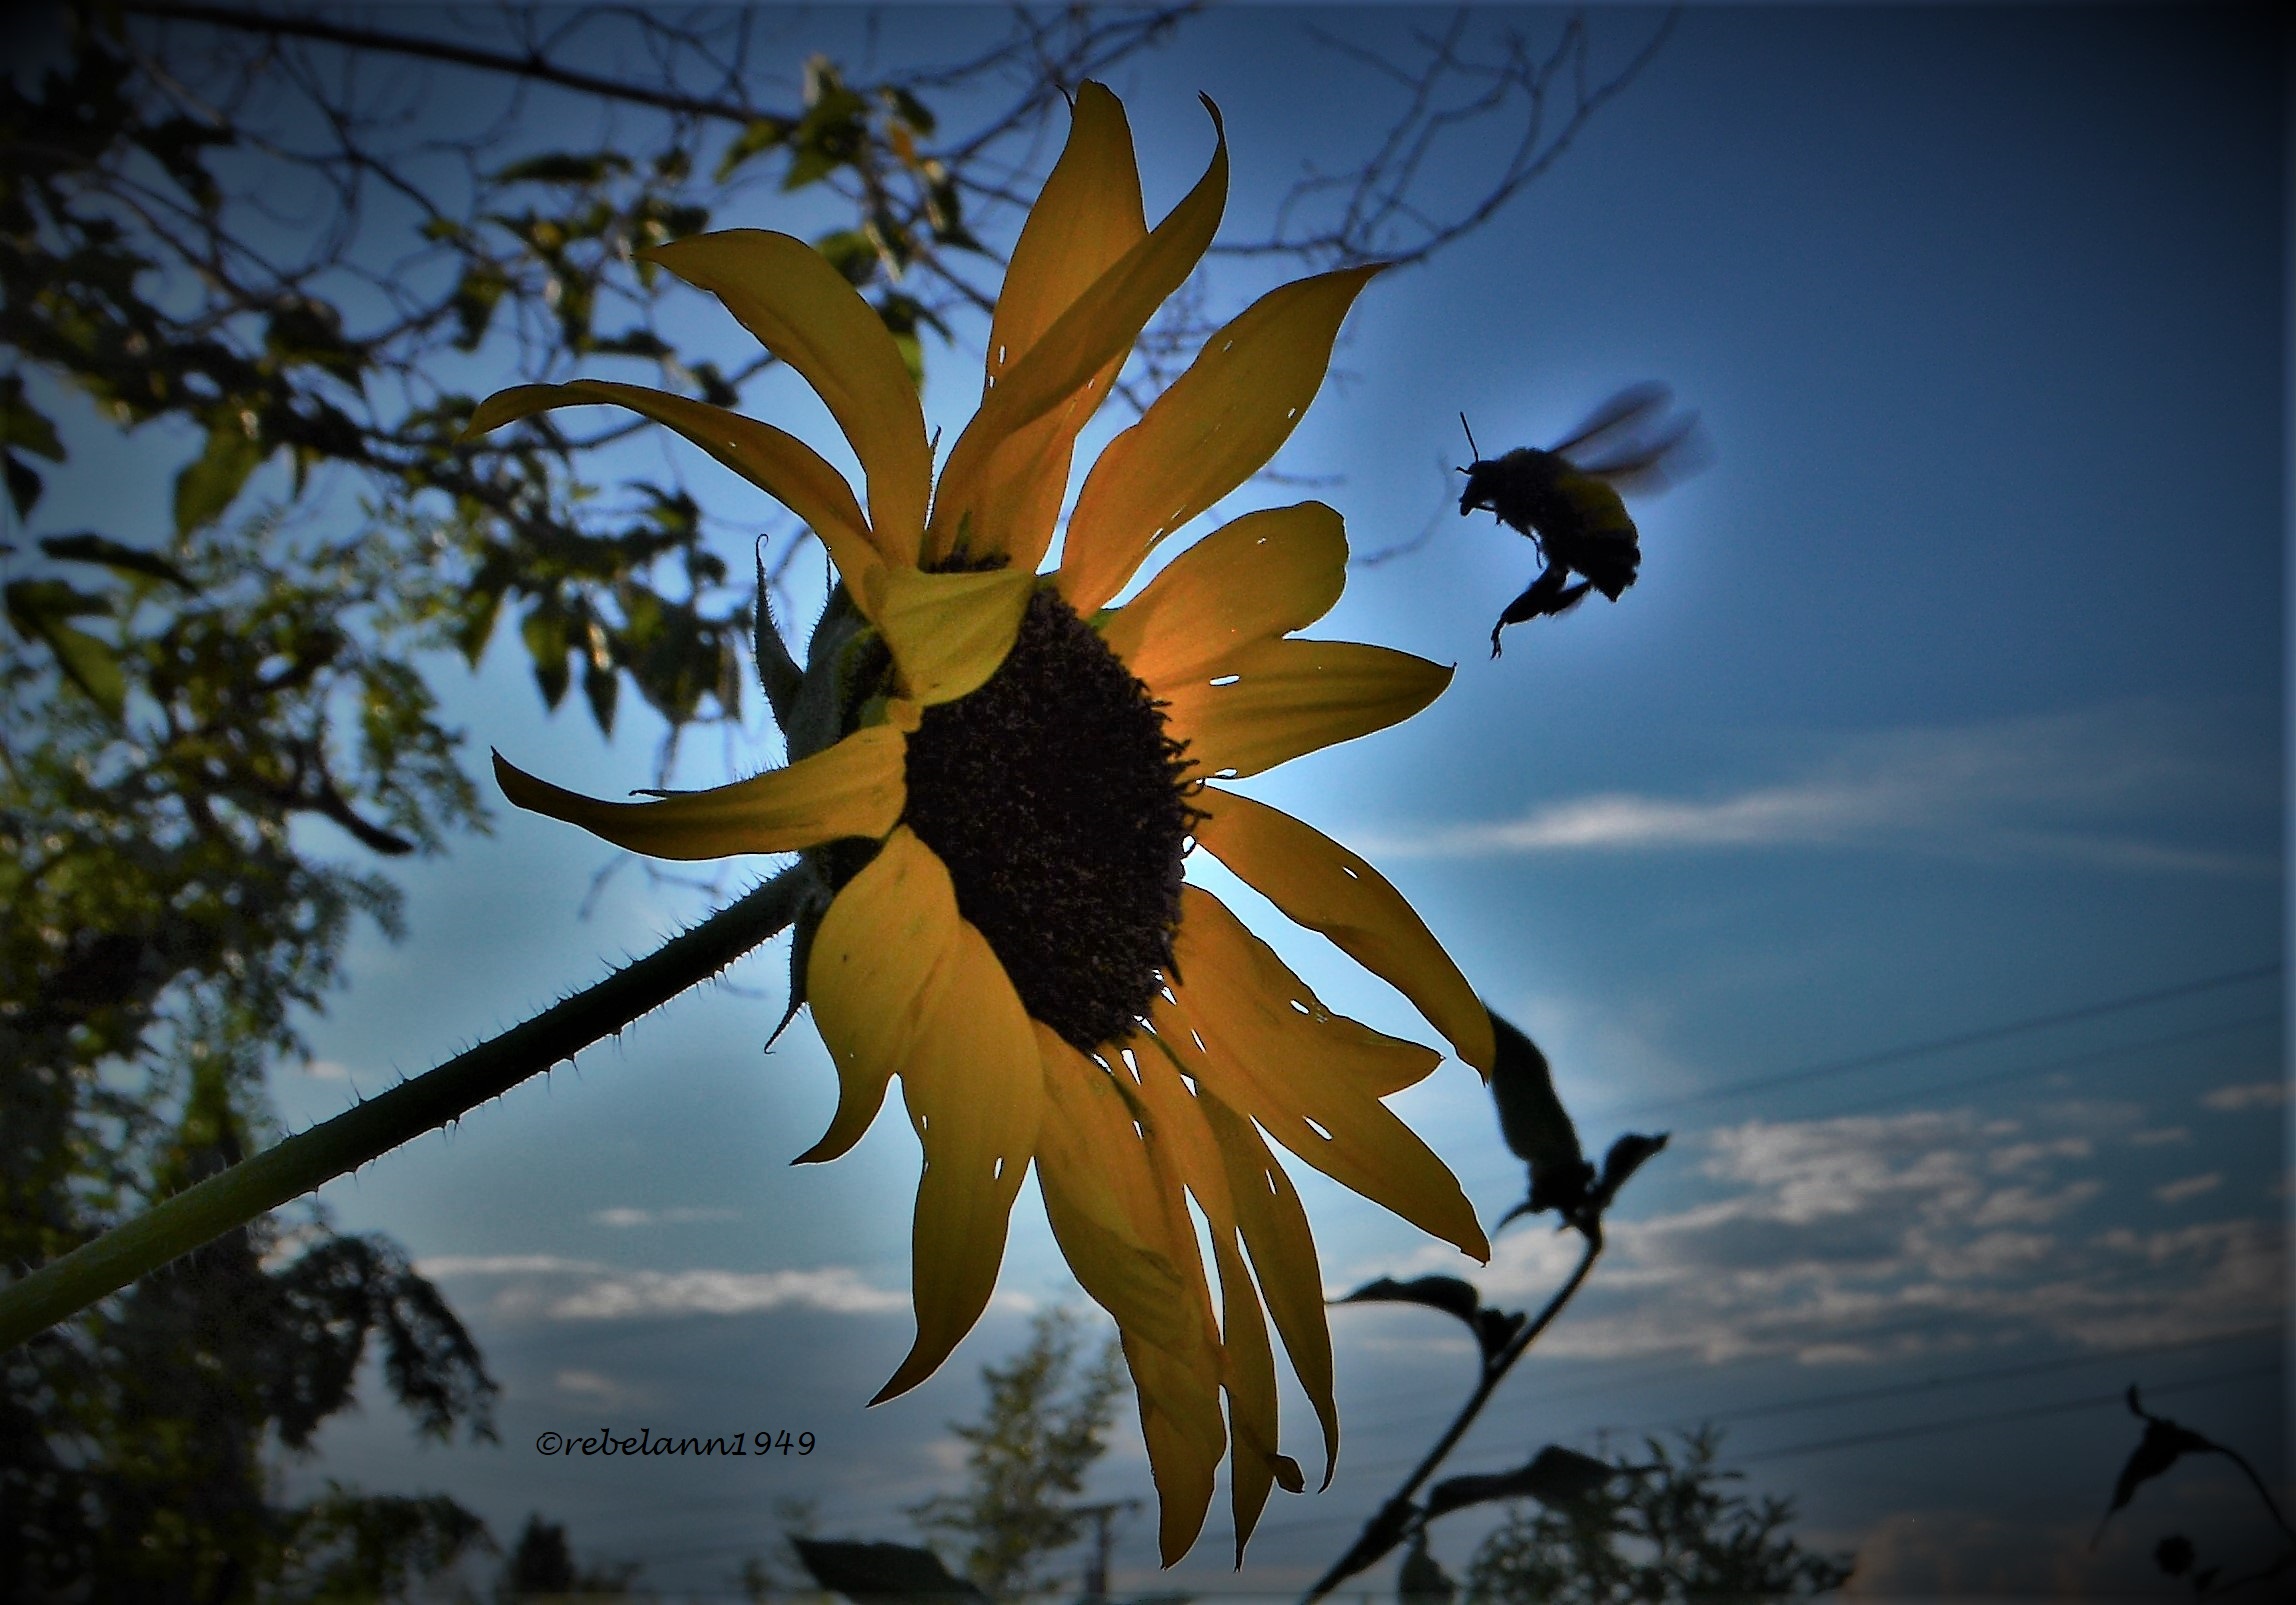 I caught a shot of a bee comin in for a landing 